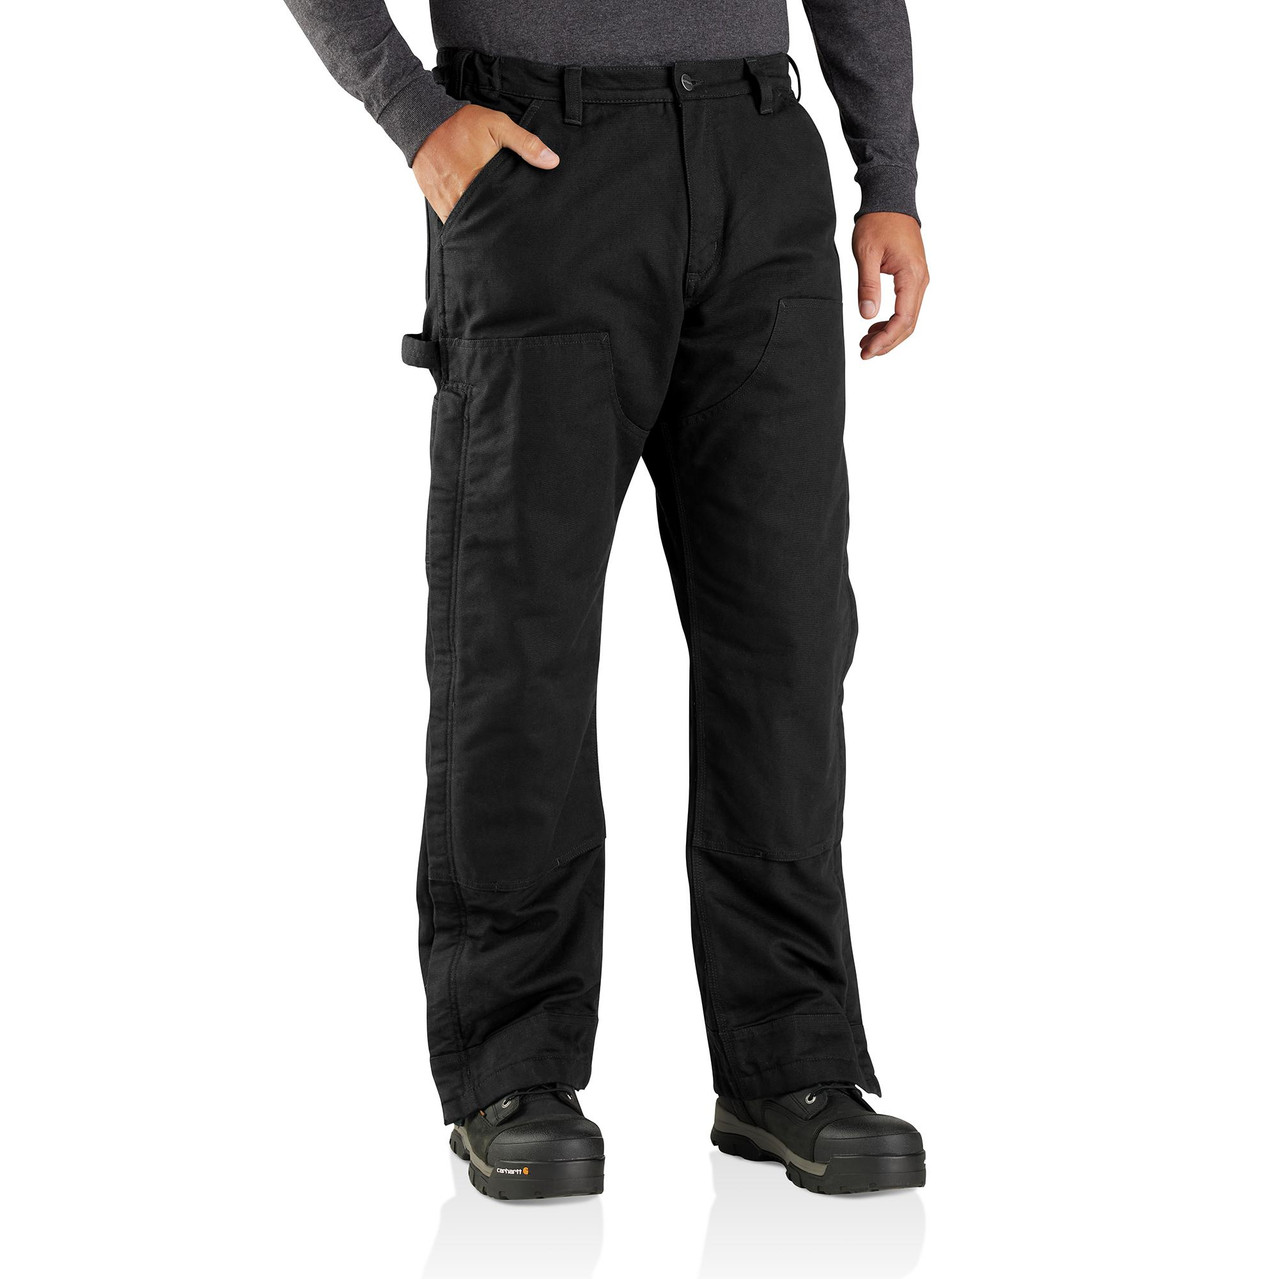 Men's Carhartt Loose Fit Washed Duck Insulated Work Pants